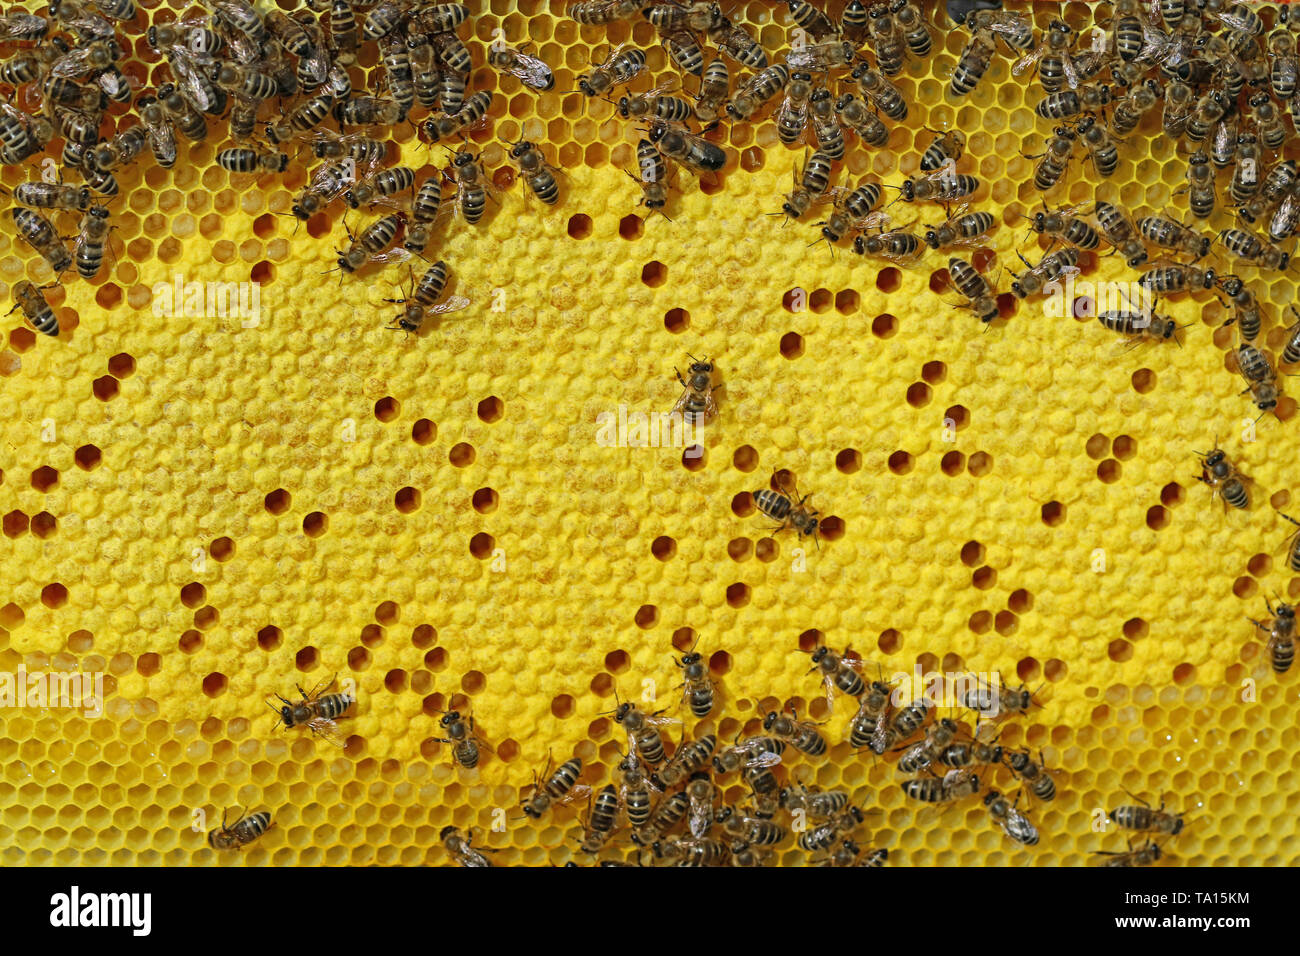 Bees on honeycomb with brood cells background Stock Photo